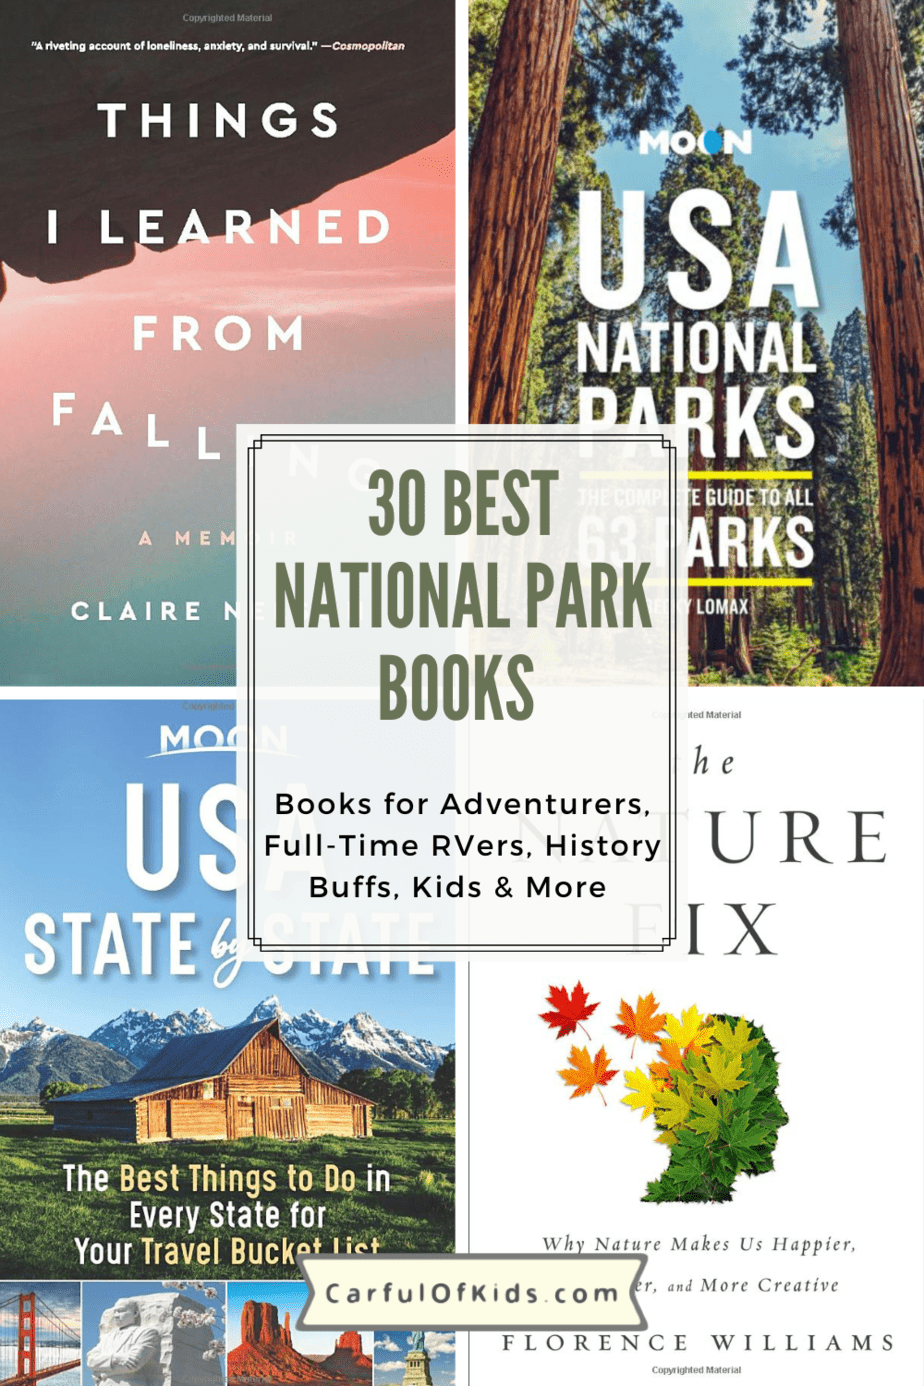 Grab the perfect book for yourself, or the outdoor adventurer, history buff or the kids in your life. Find a book about the National Parks for everyone, including those who don't camp. Find riveting accounts of survival as well. Best Books for National Park Fans | Books about the National Parks #NationalParks #TravelBooks #Books